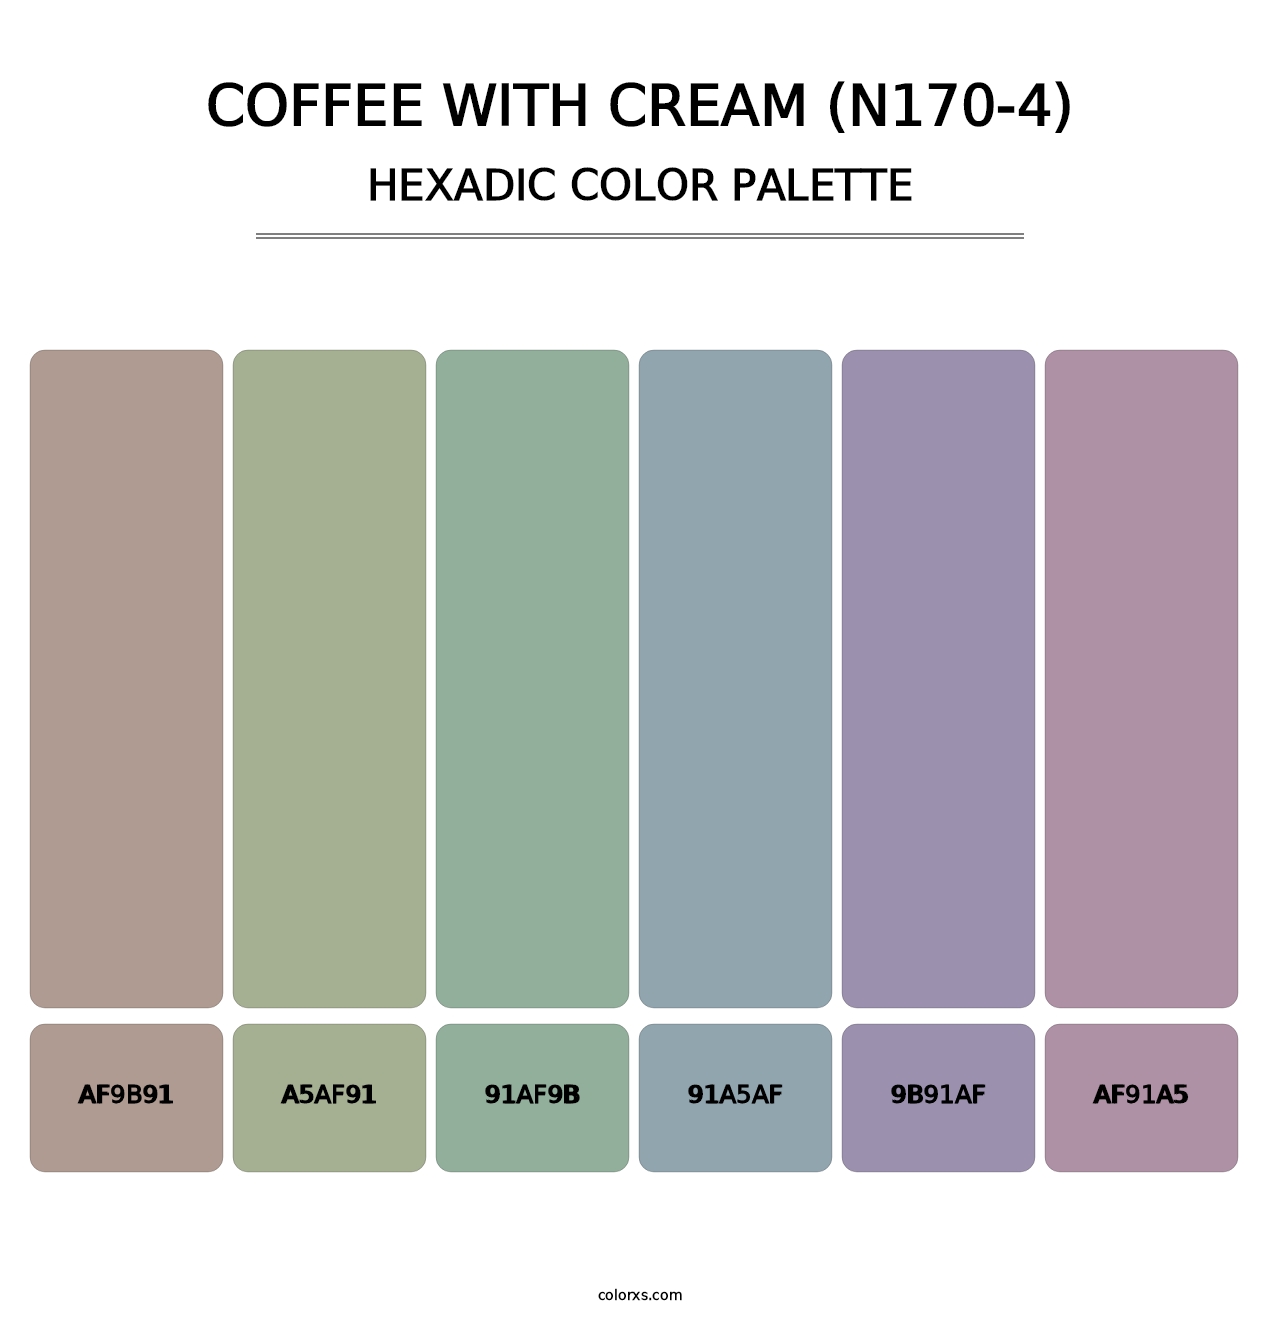 Coffee With Cream (N170-4) - Hexadic Color Palette